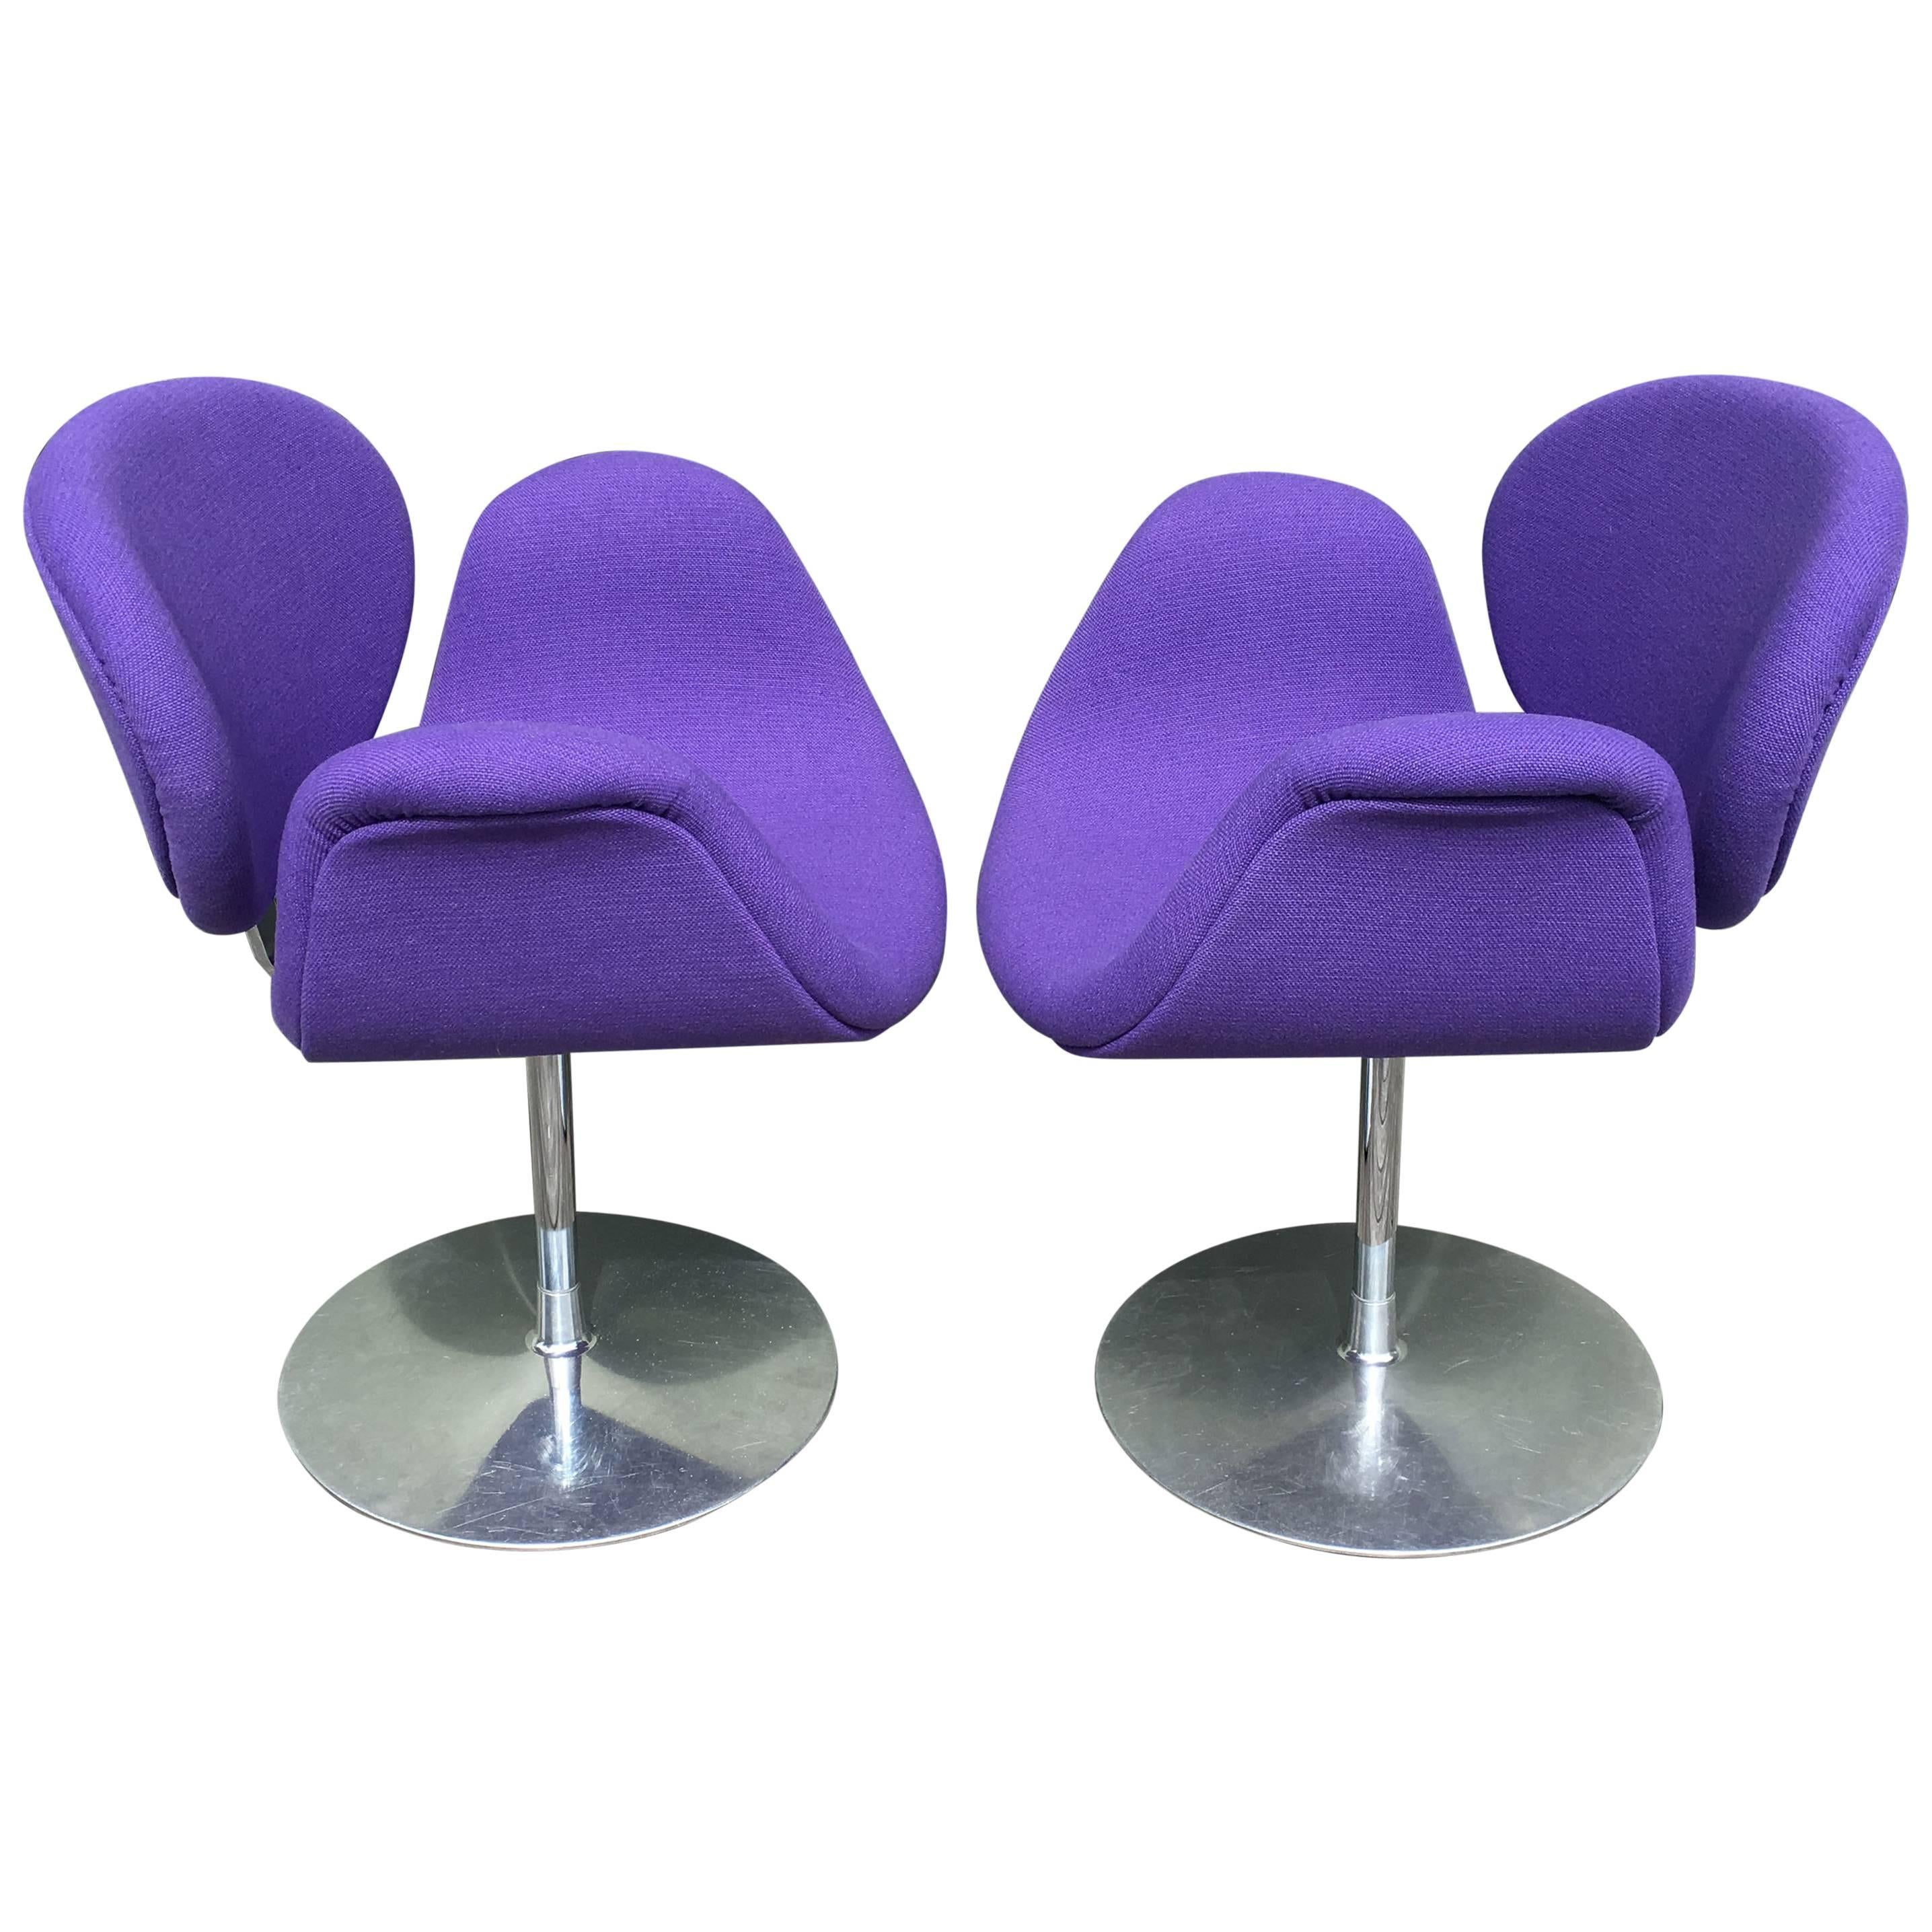 Pair of Small Tulip Chairs by Pierre Paulin for Artifort